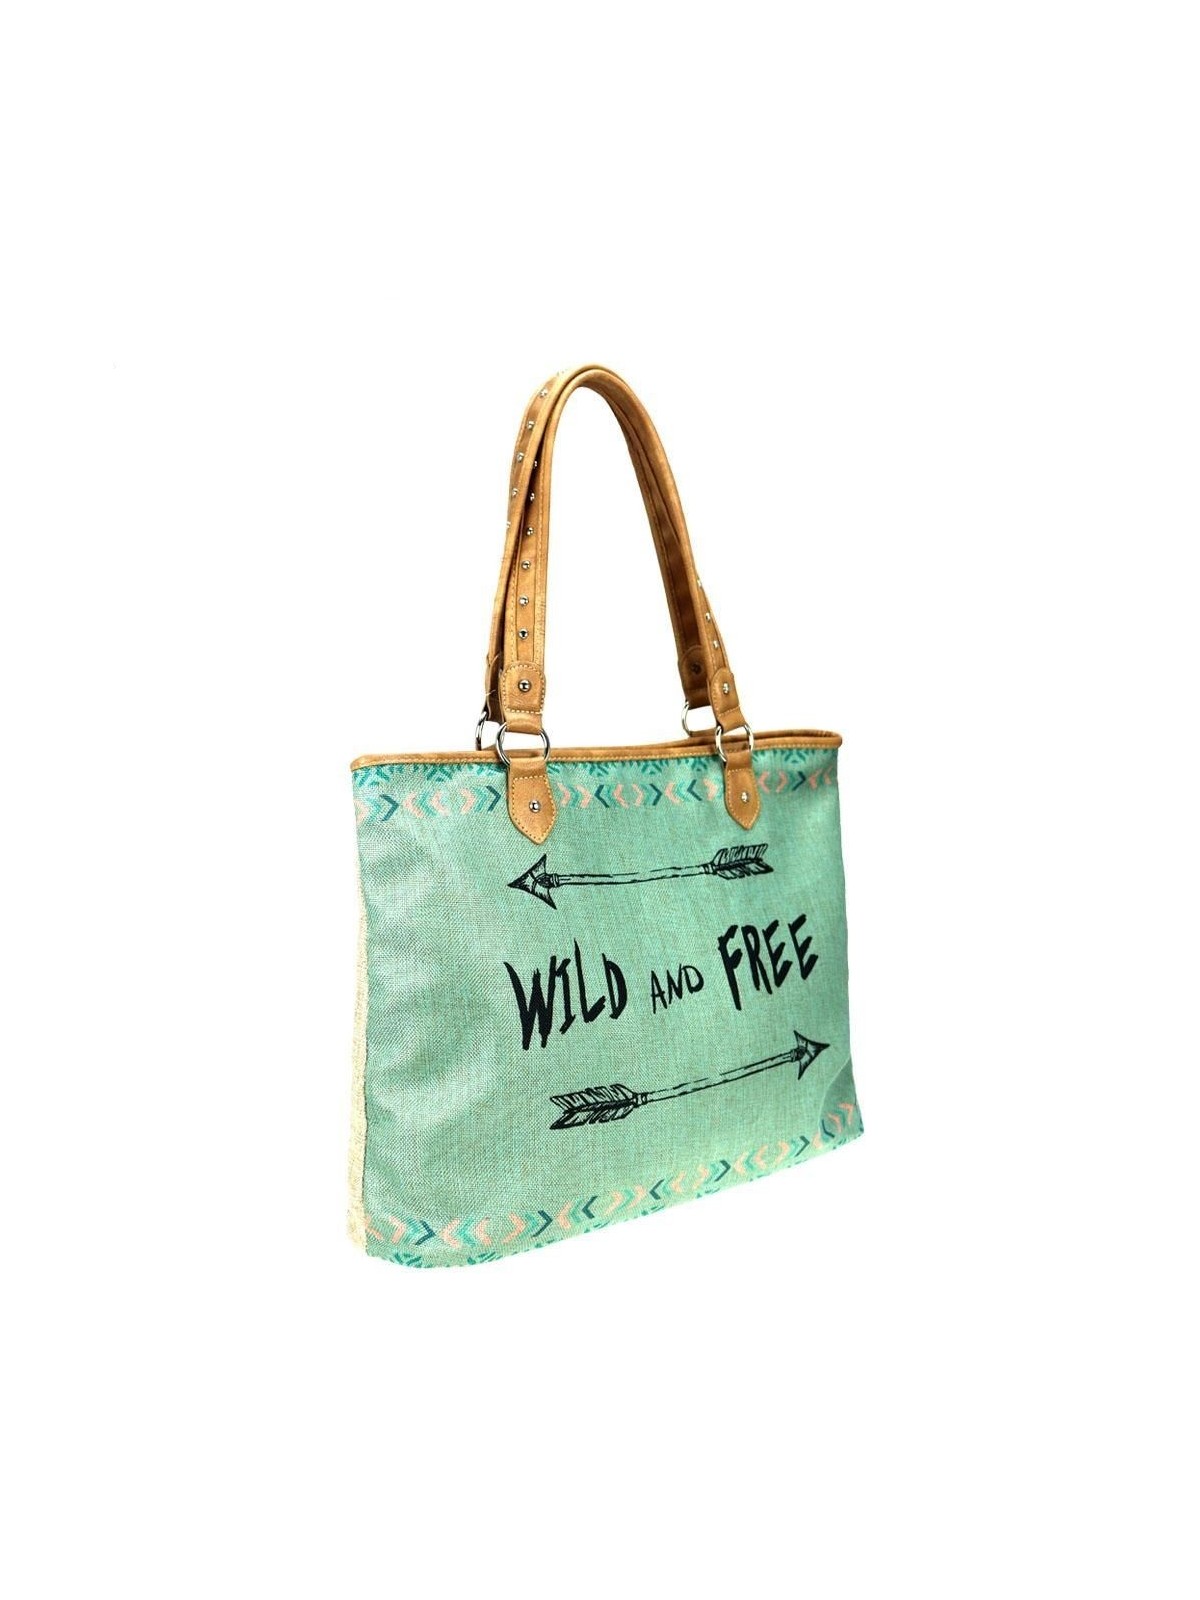 Tote Bag Canvas Wild and Free